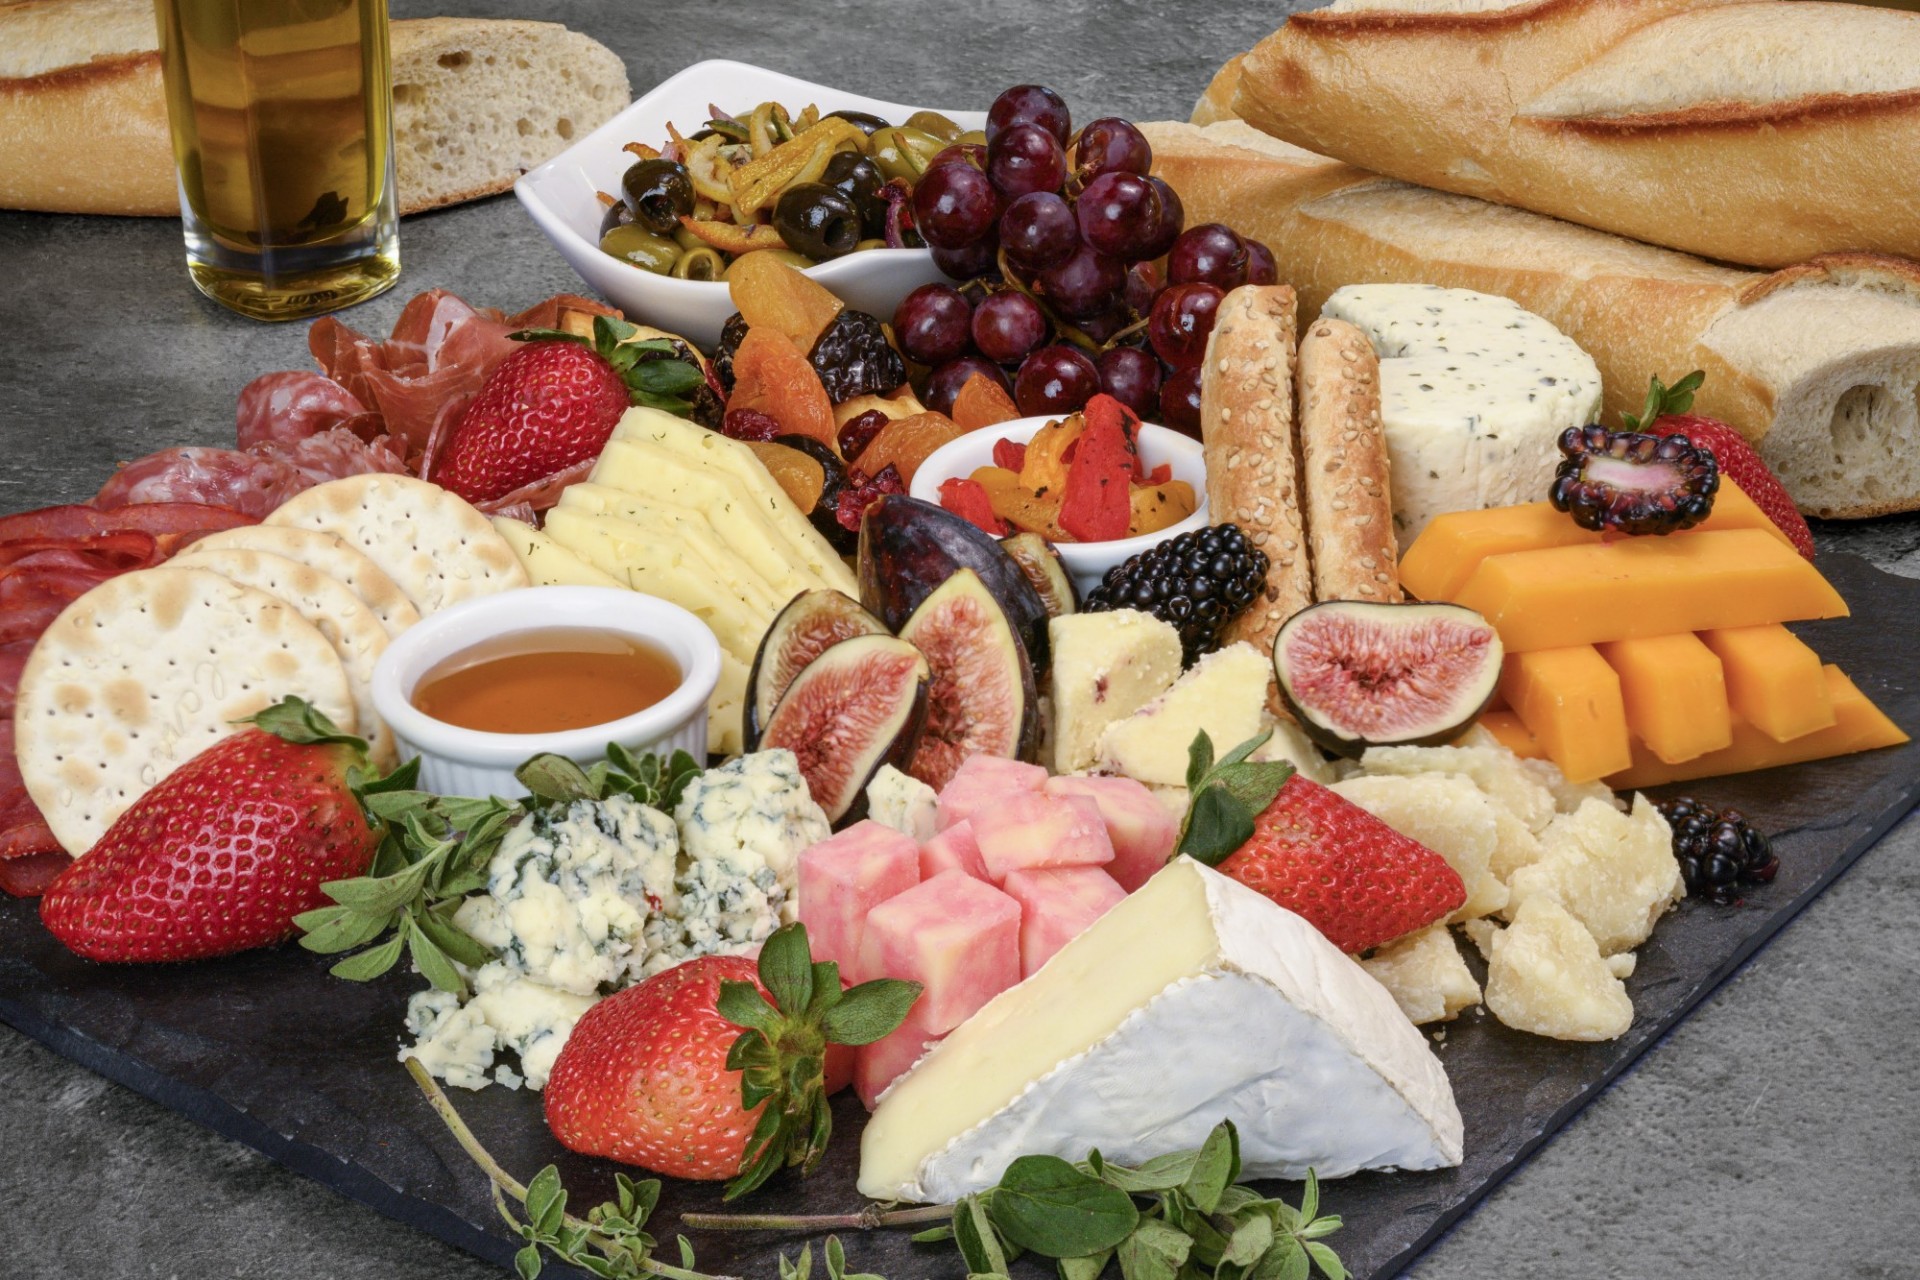 A platter of delicious fruits and cheeses with olives, cured meats and fresh bread.